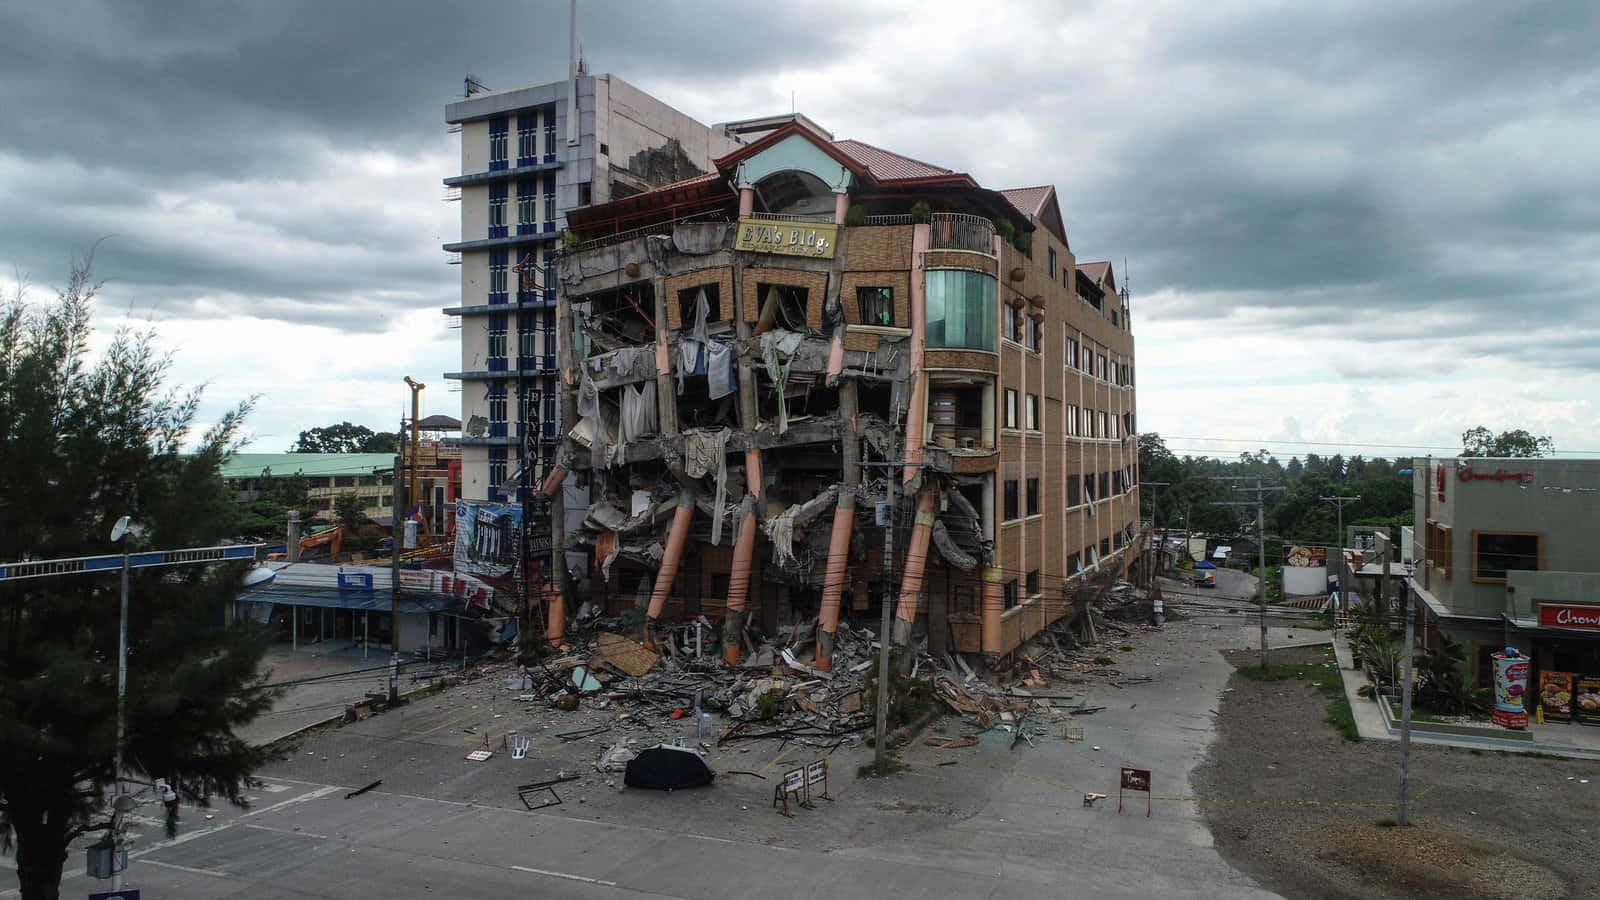 A Building That Has Been Destroyed By An Earthquake